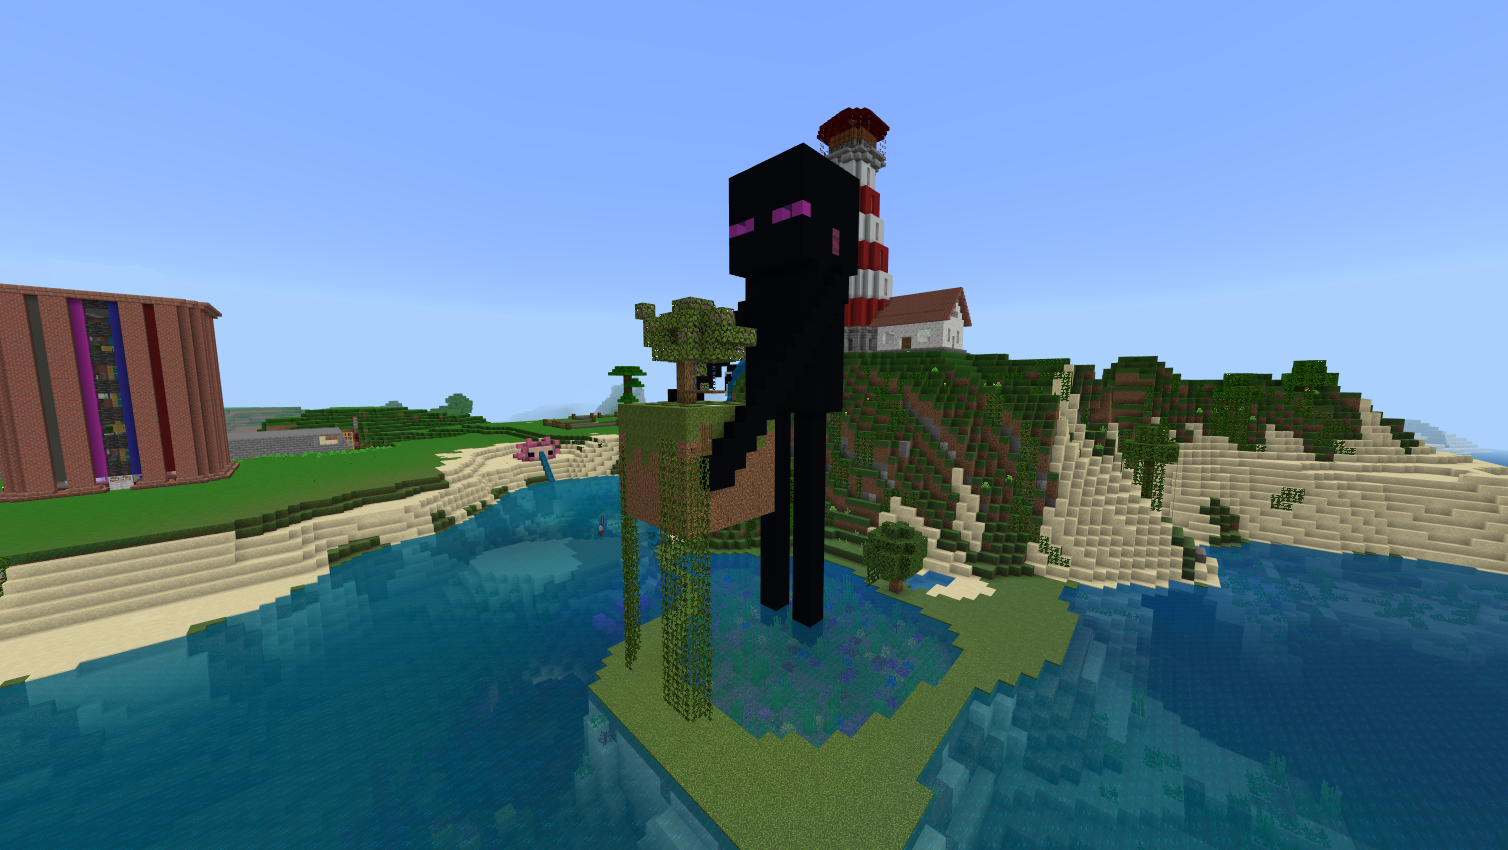 Enormous enderman statue holding a chunk of land